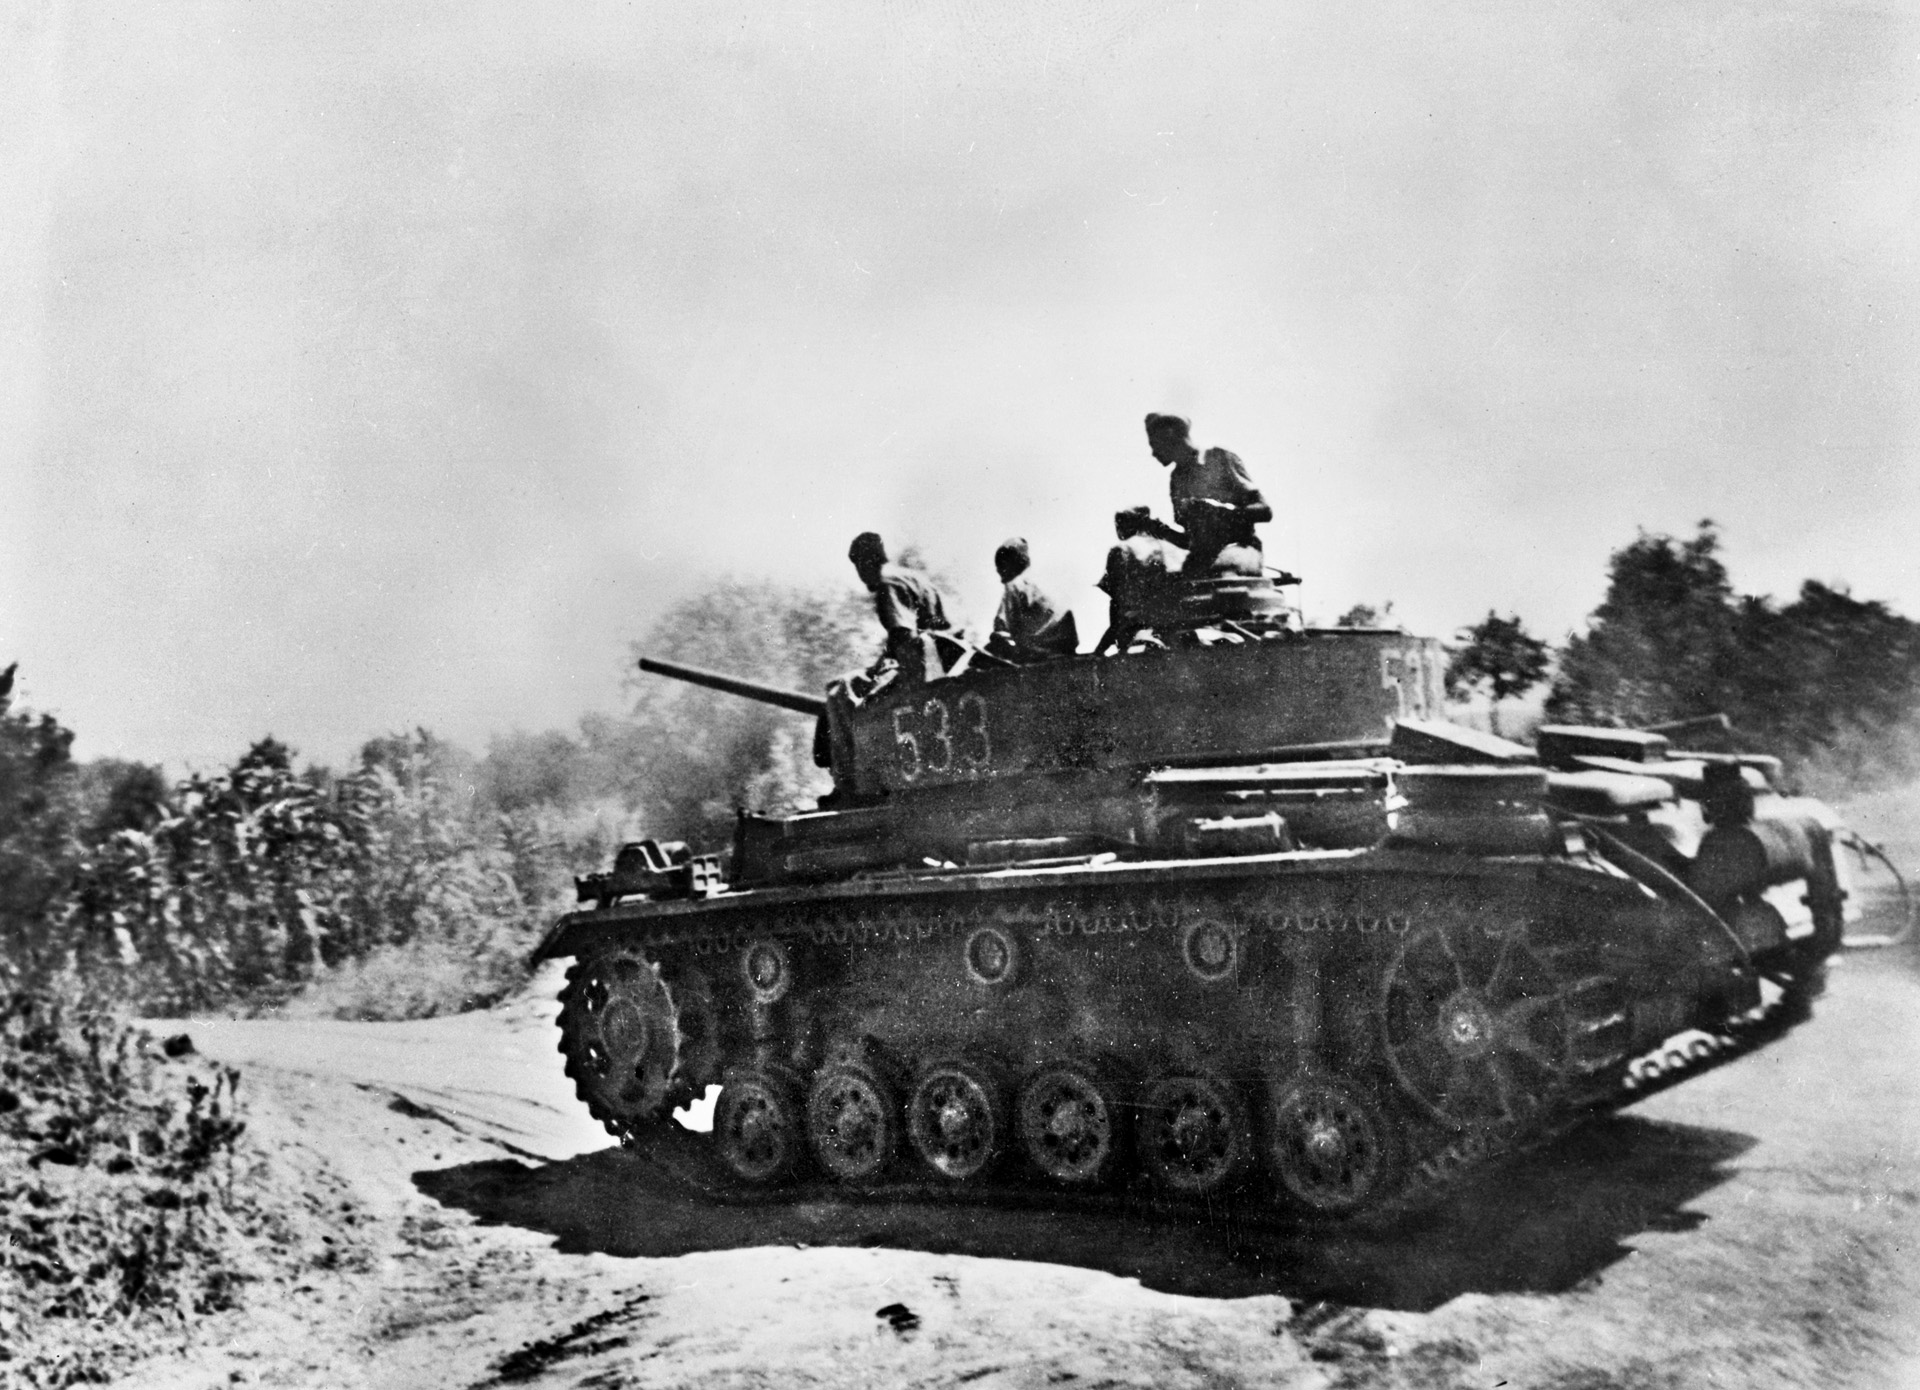 A German Panzer III raises a cloud of dust as it drives towards the U.S. Seventh Army's beachhead. Axis tanks broke through the thin lines at Gela until individual acts of heroism and naval gunfire took a heavy toll on German and Italian armor.